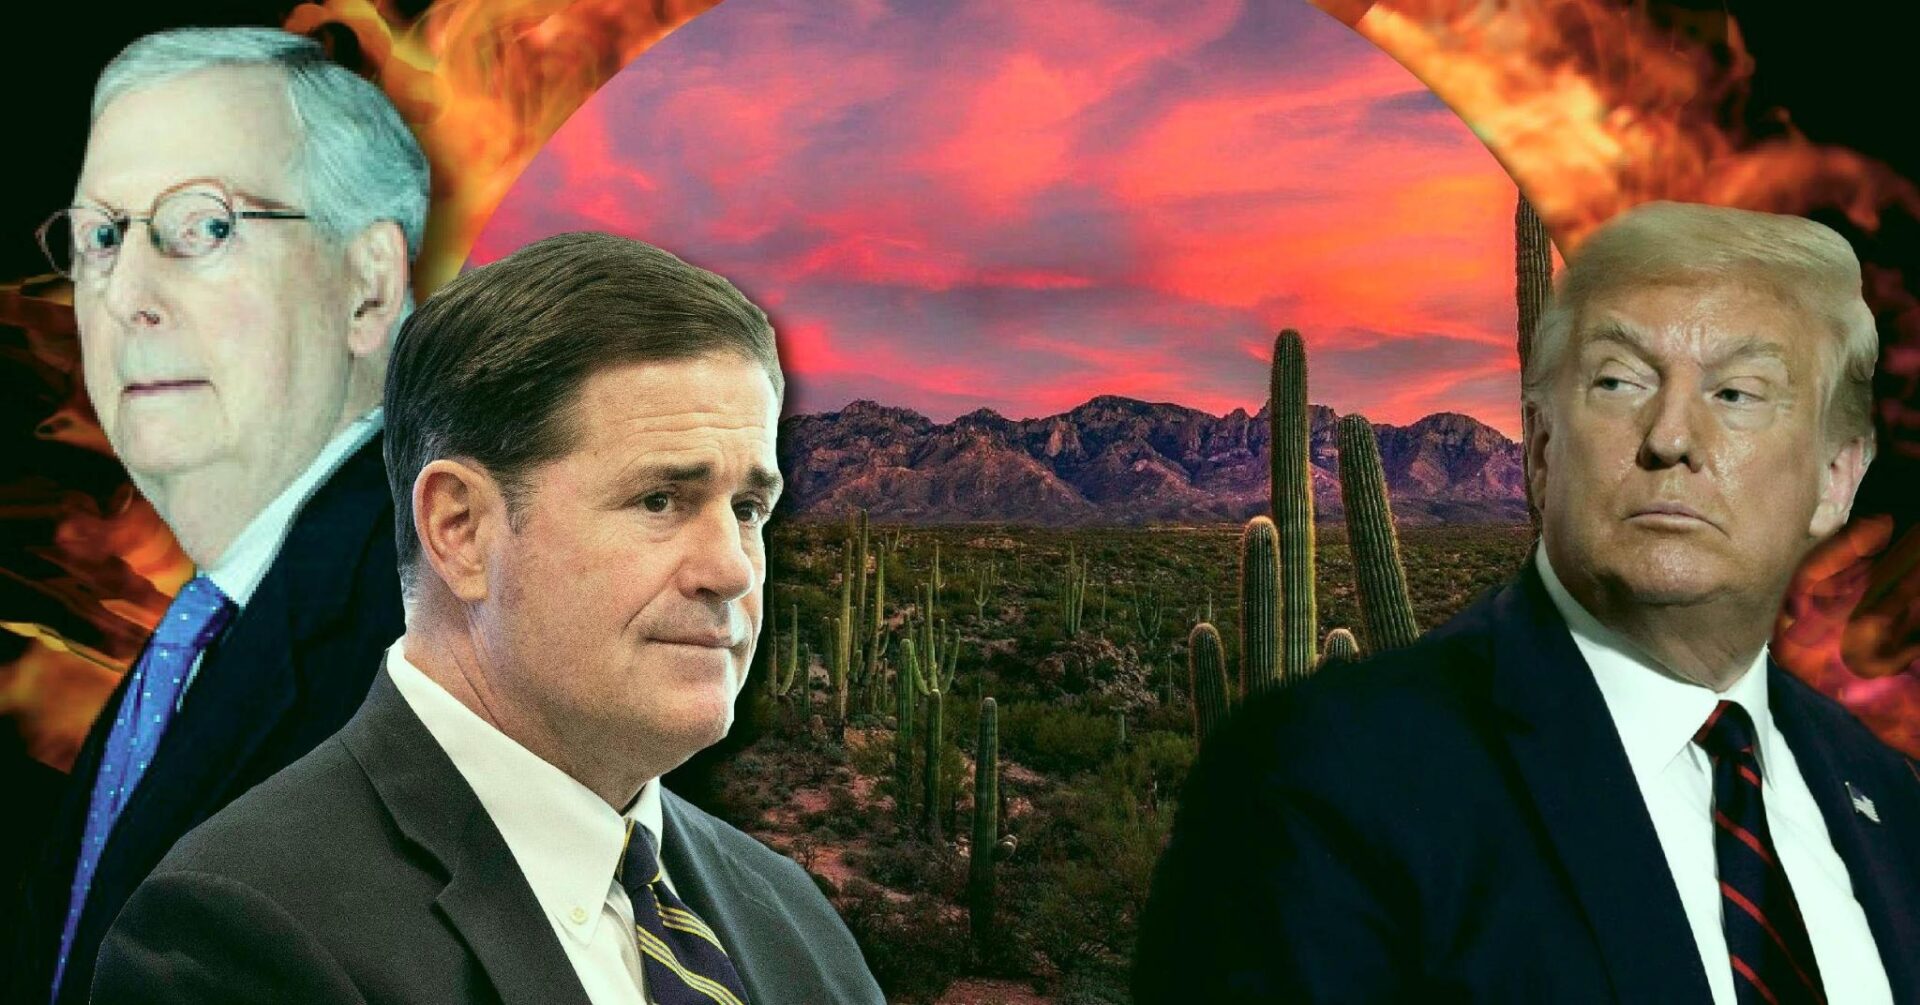 It's a Ducey: The Inside Scoop on McConnell's Latest Scheme to Harm Trump and the MAGA Movement - Revolver